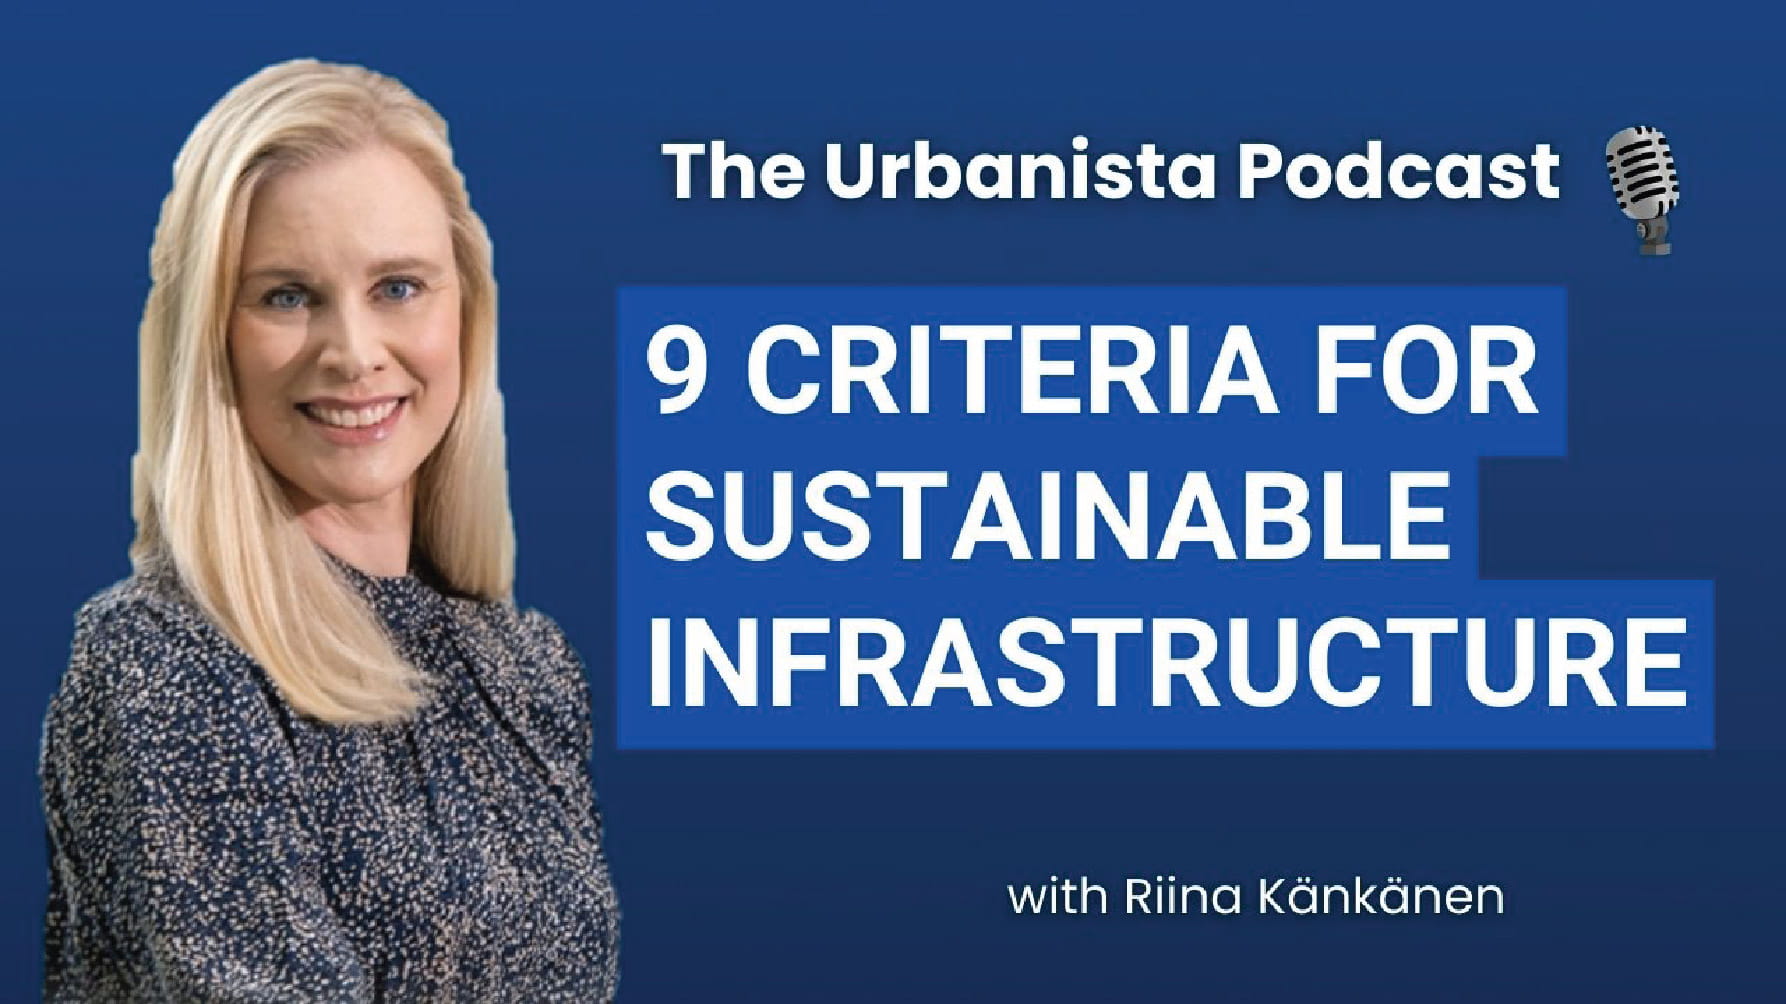 9 criteria for sustainable infrastructure